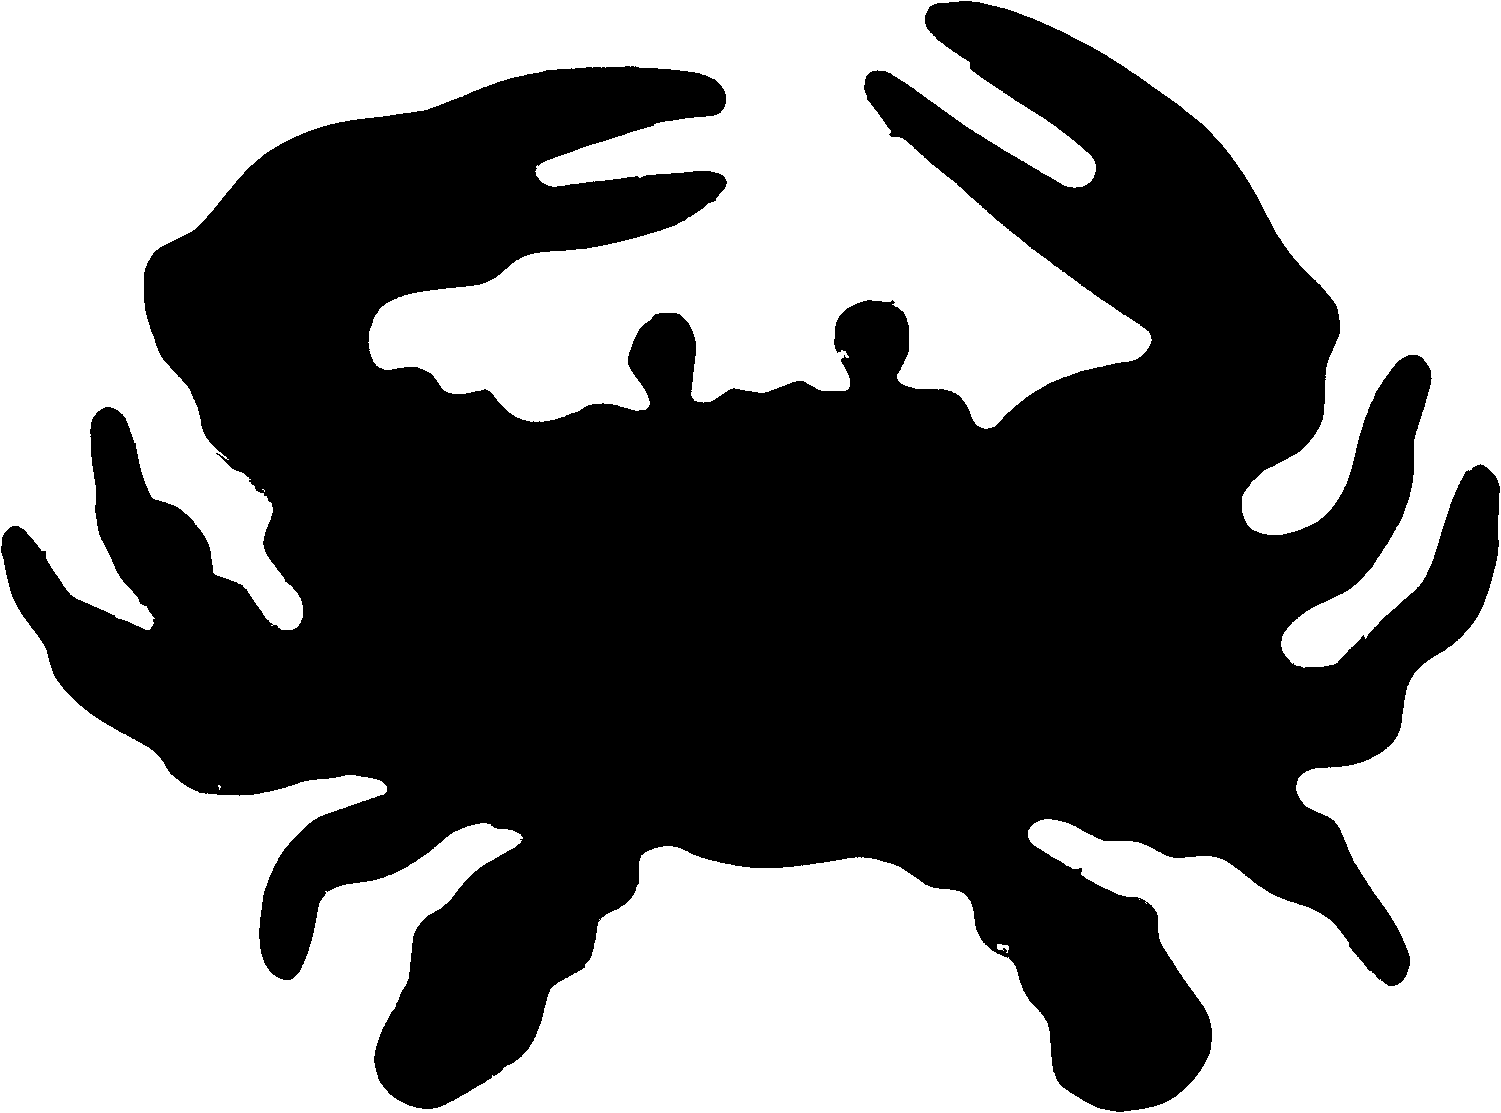 Crab Turtle Silhouette Selopamioro Png Image Clipart